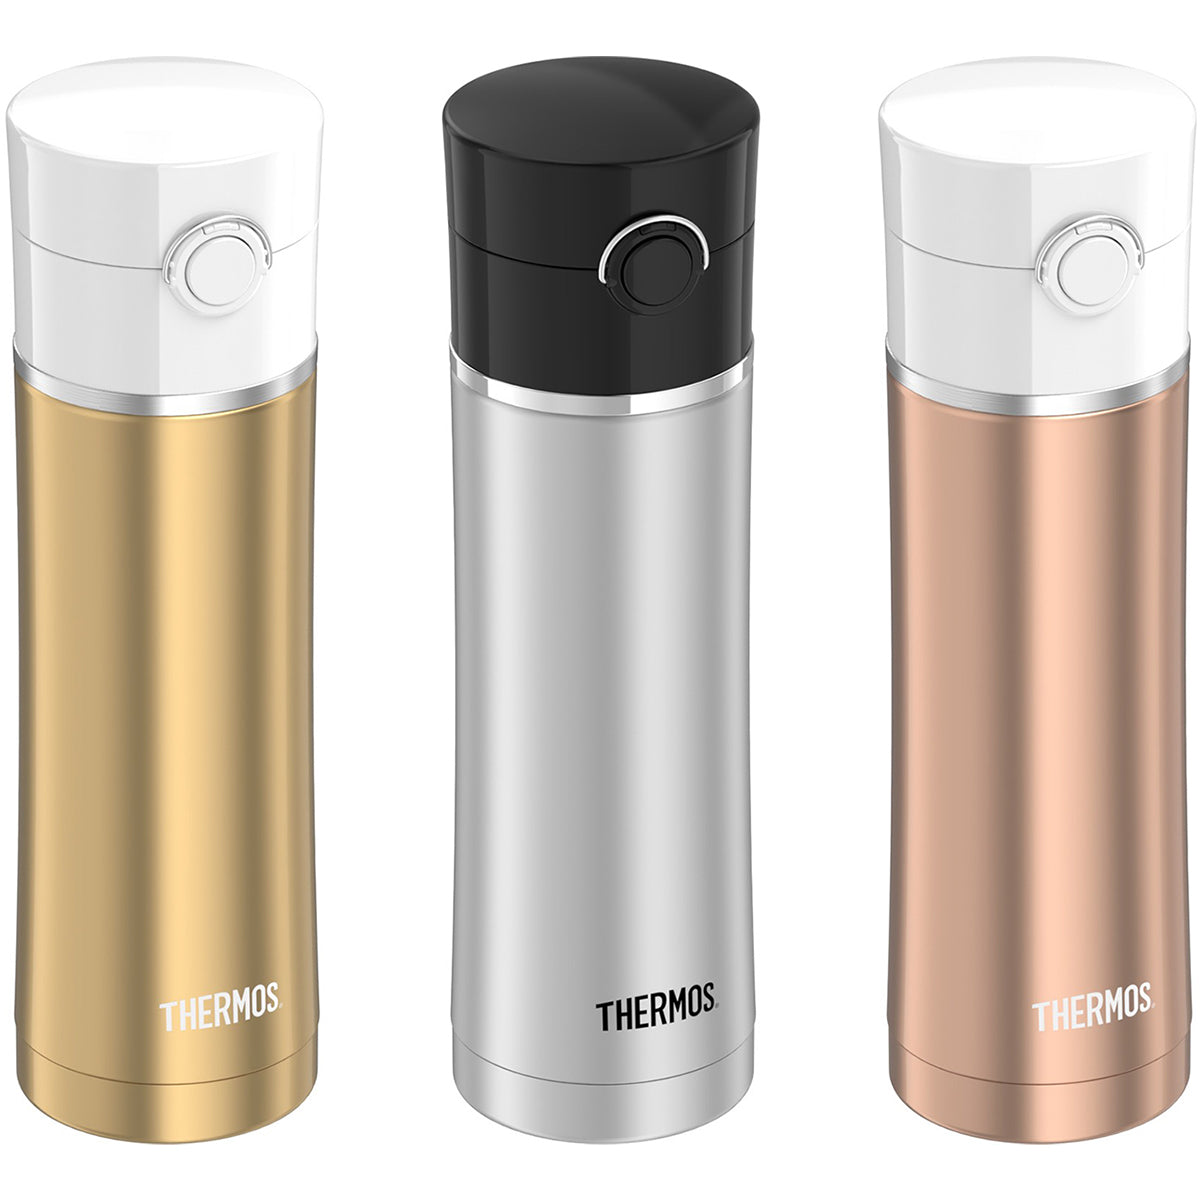 Thermos 16 oz. Sipp Vacuum Insulated Stainless Steel Water Bottle Thermos